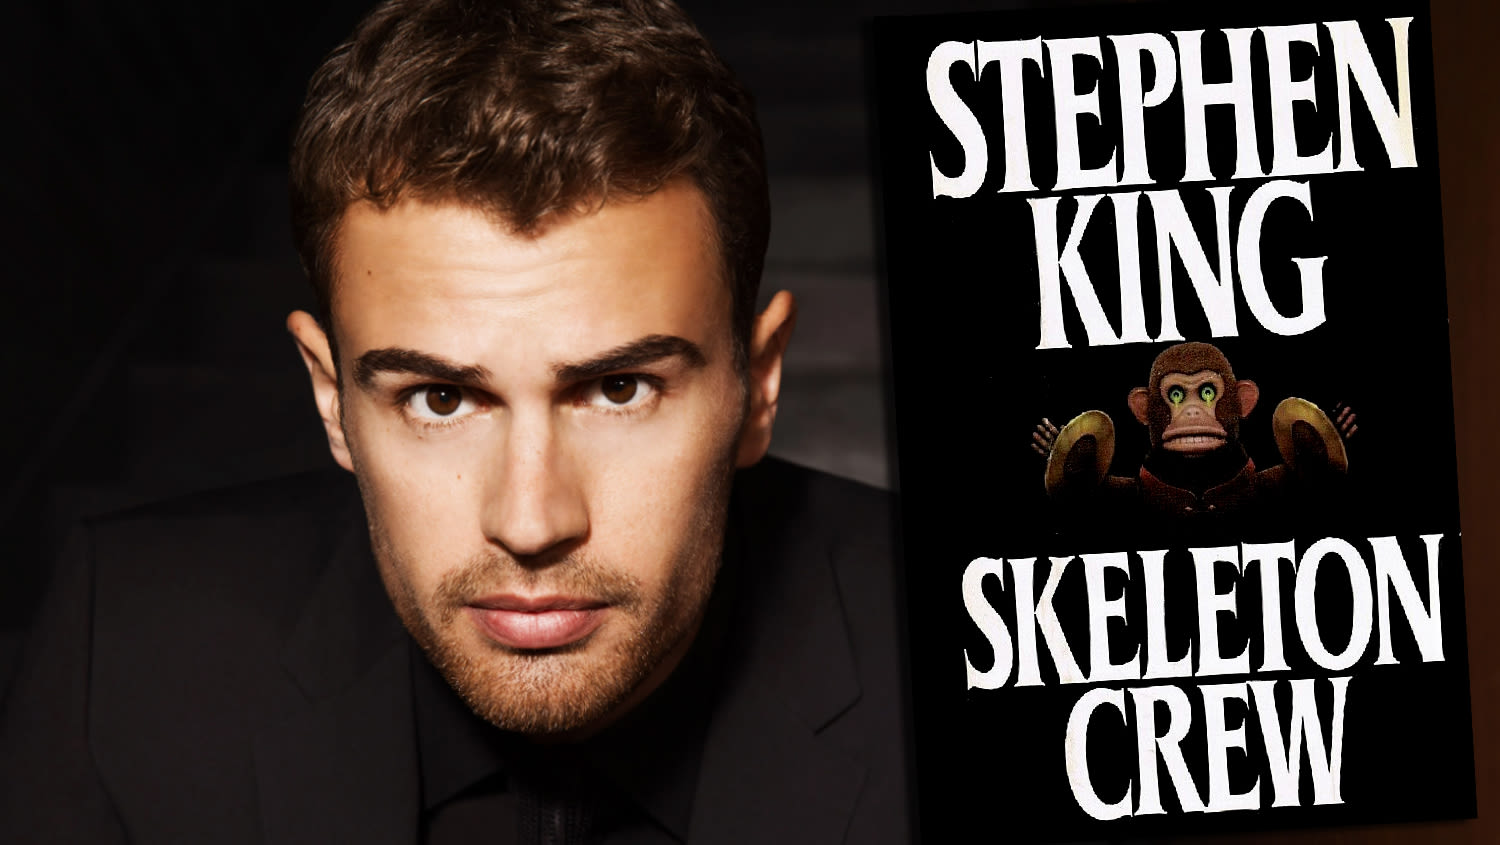 Stephen King Adaptation ‘The Monkey’, Starring Theo James, Pre-Sells To Neon For U.S. After Promo Sparks Buyer Tug...